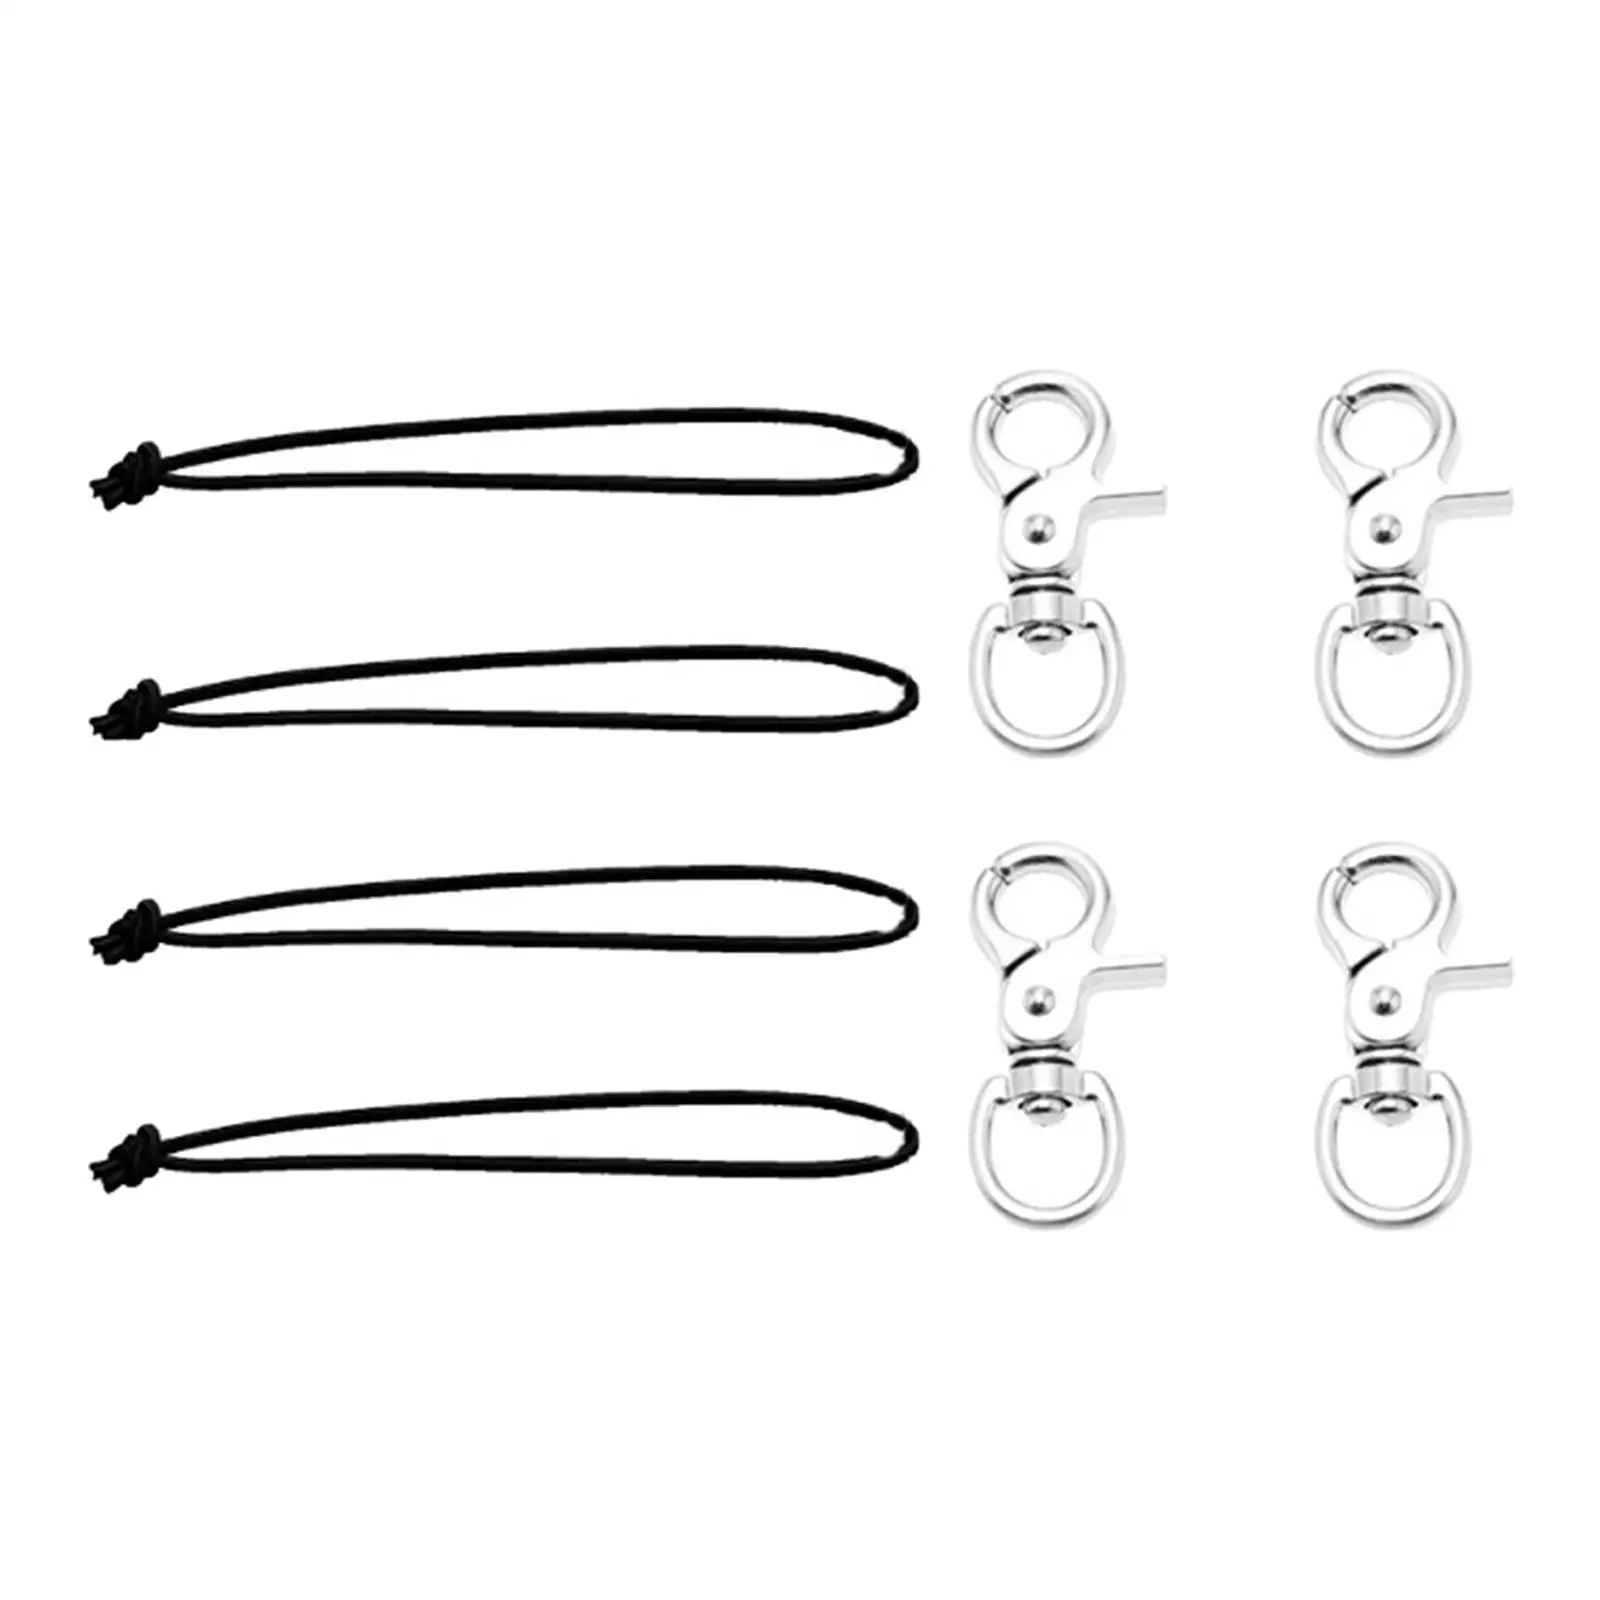 4 Pieces Strong Snowboard Leash Cord Replacement Outdoor Accessories Elastic